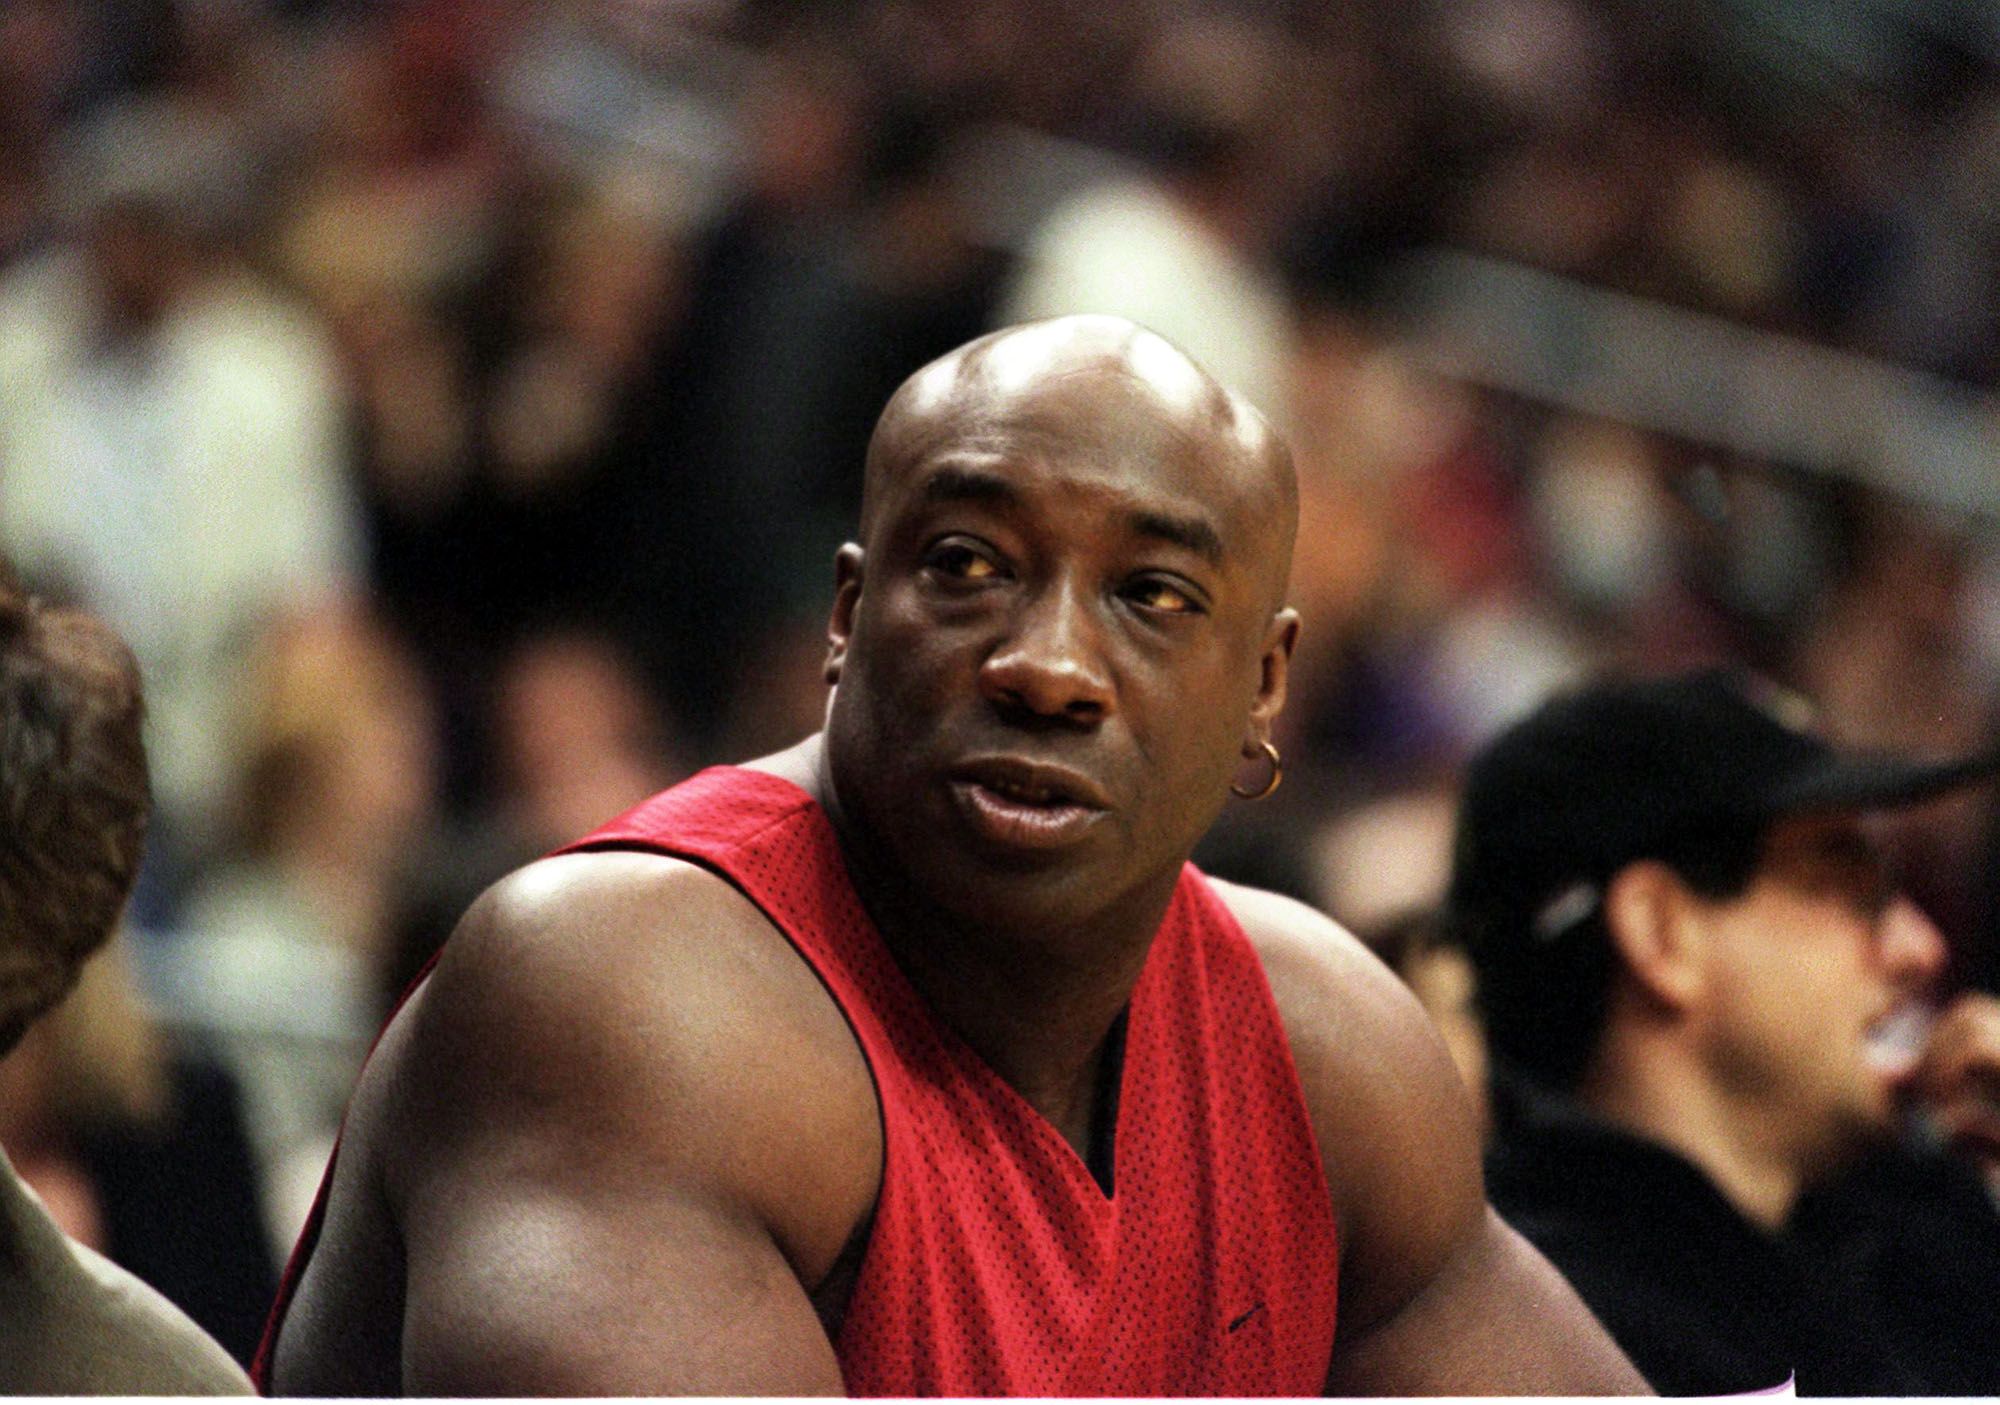 Michael Clarke Duncan attends the 76Ers-Lakers game In Los Angeles, California on March 31, 2000. | Photo: Getty Images